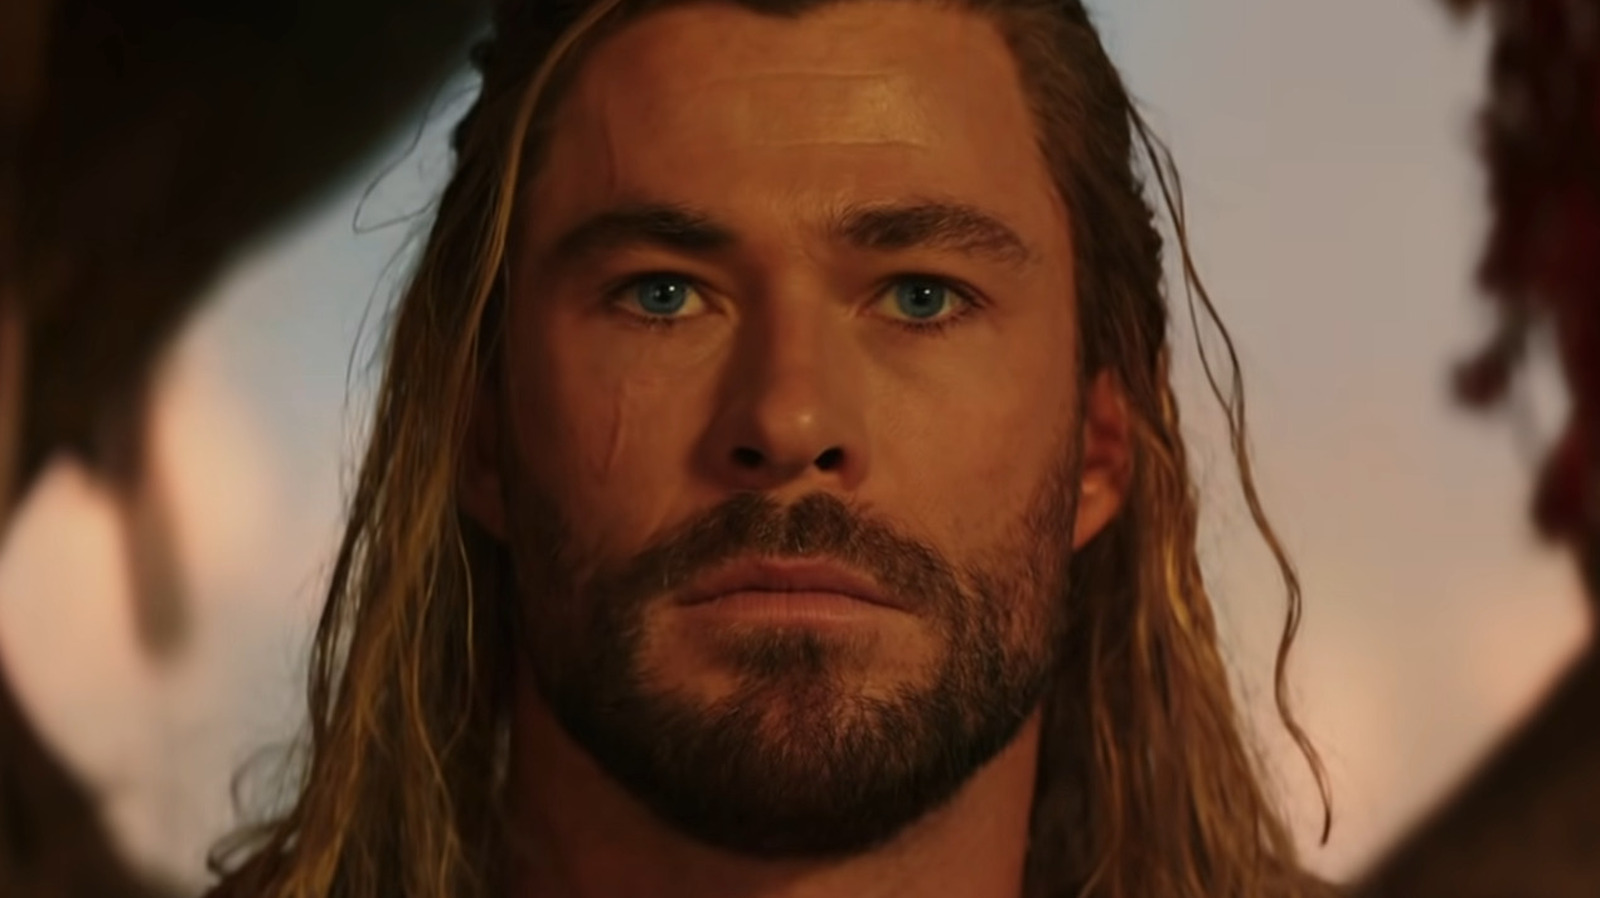 Thor: Love and Thunder': Chris Hemsworth's Kids and Cameos in Movie